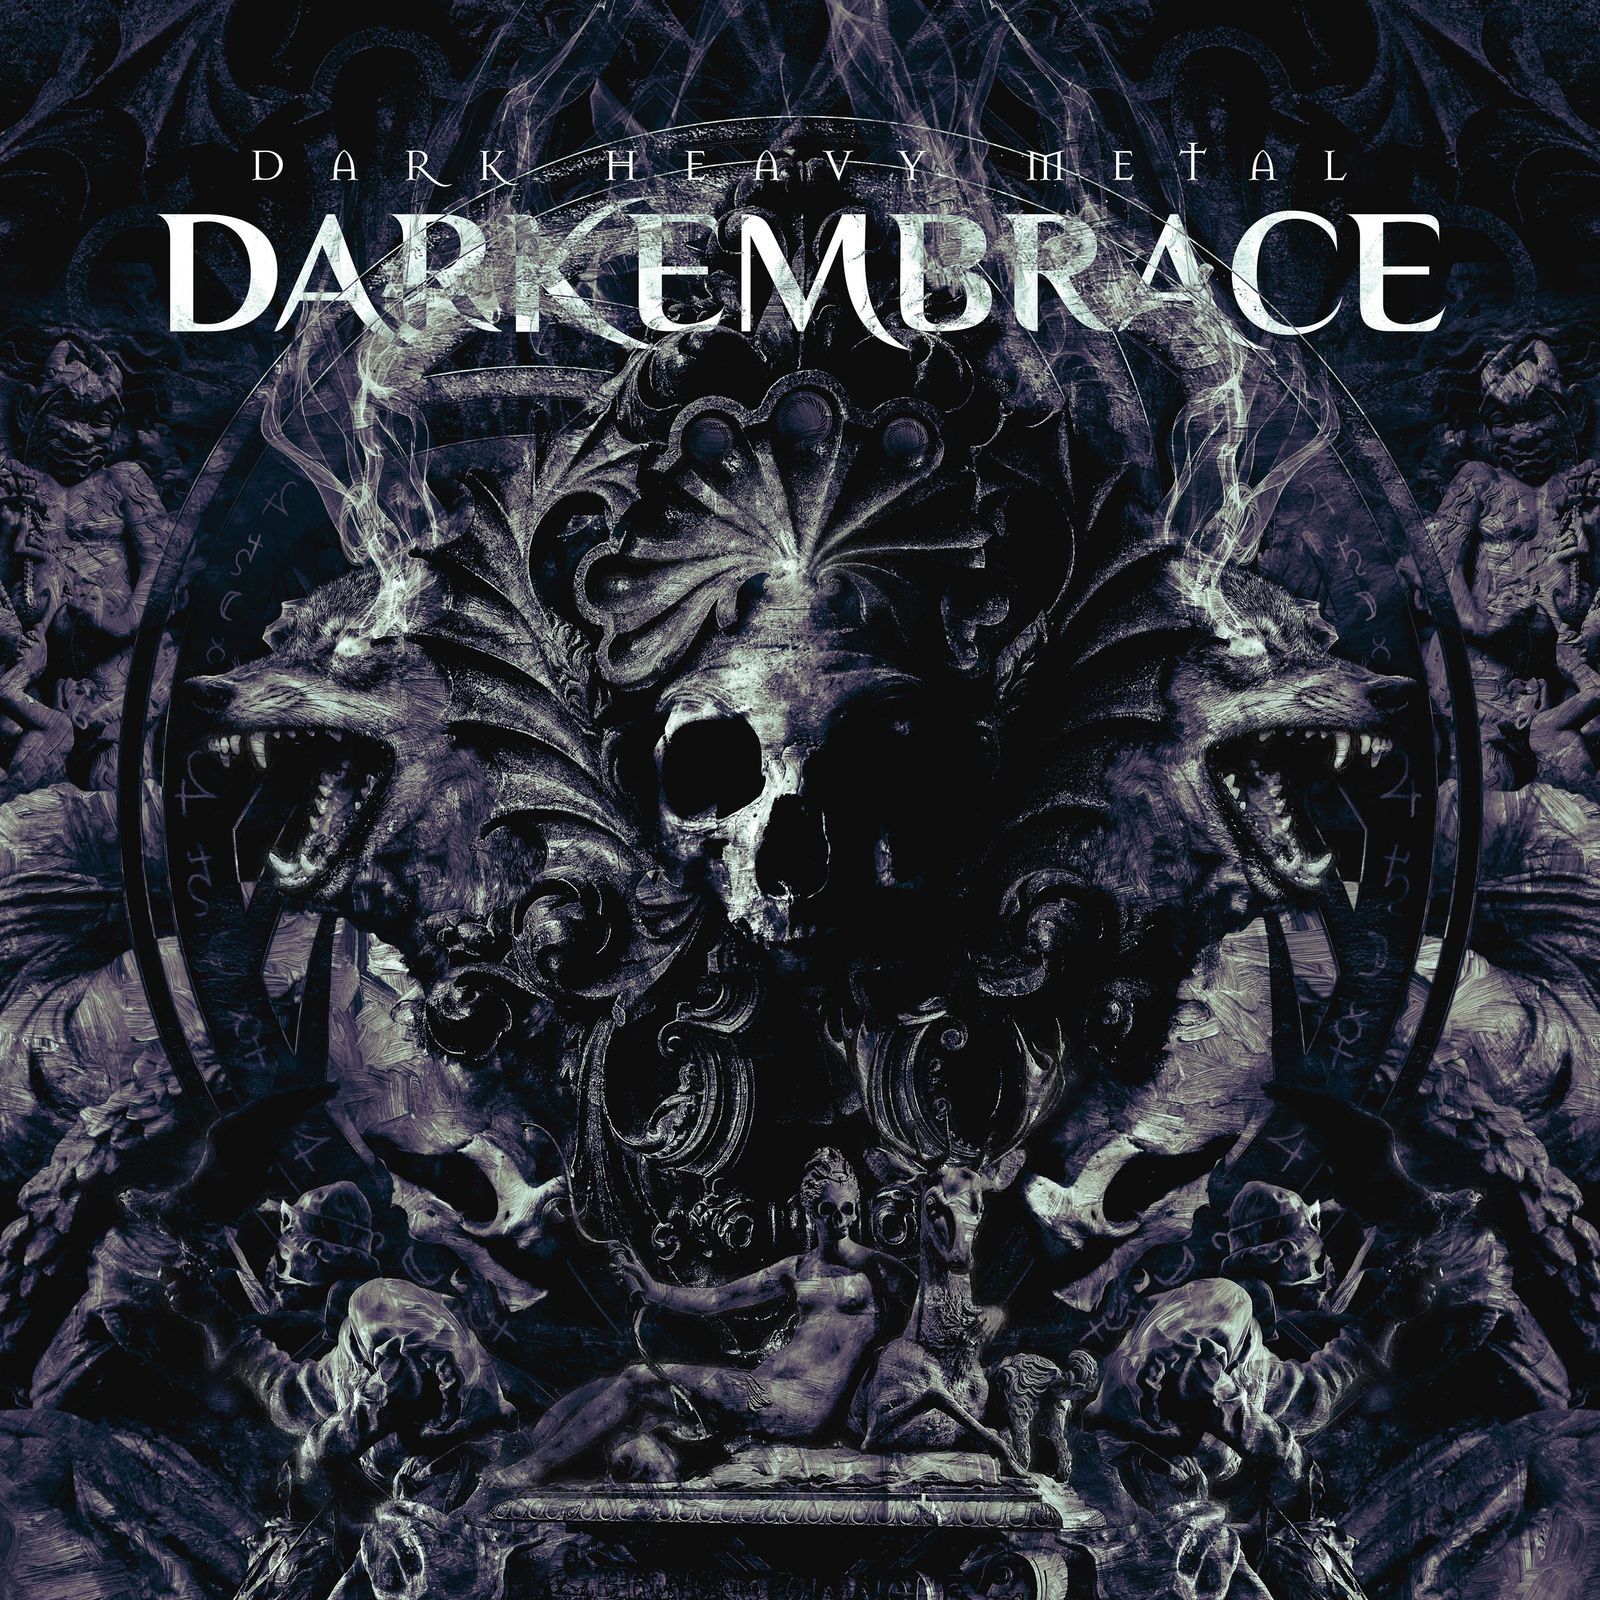 Dark Embrace - Personal Hell (clip)